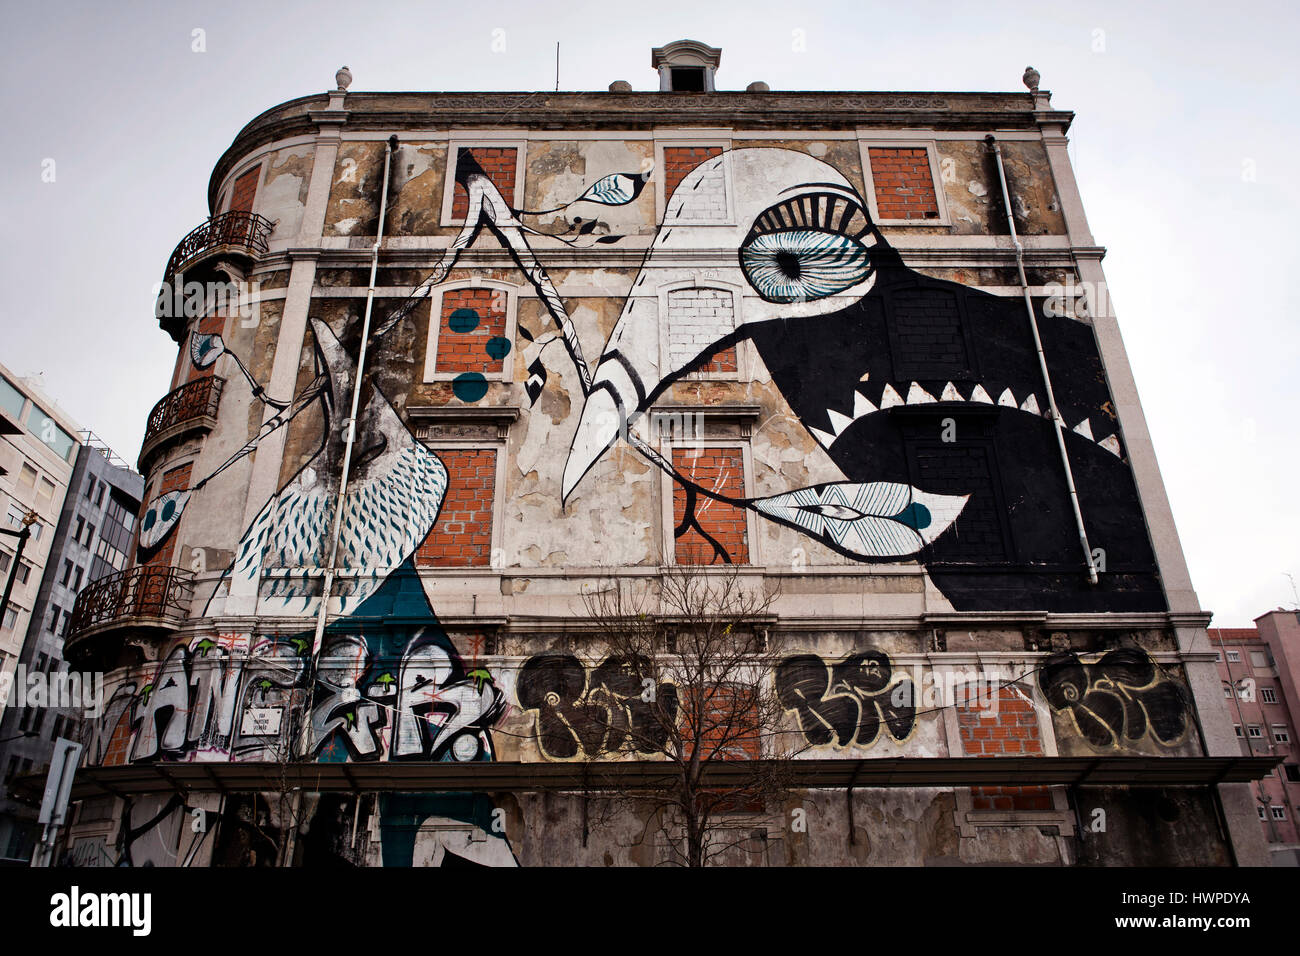 A Street art painting by Lucy McLauchlan on a wall in Lisbon, Portugal ...